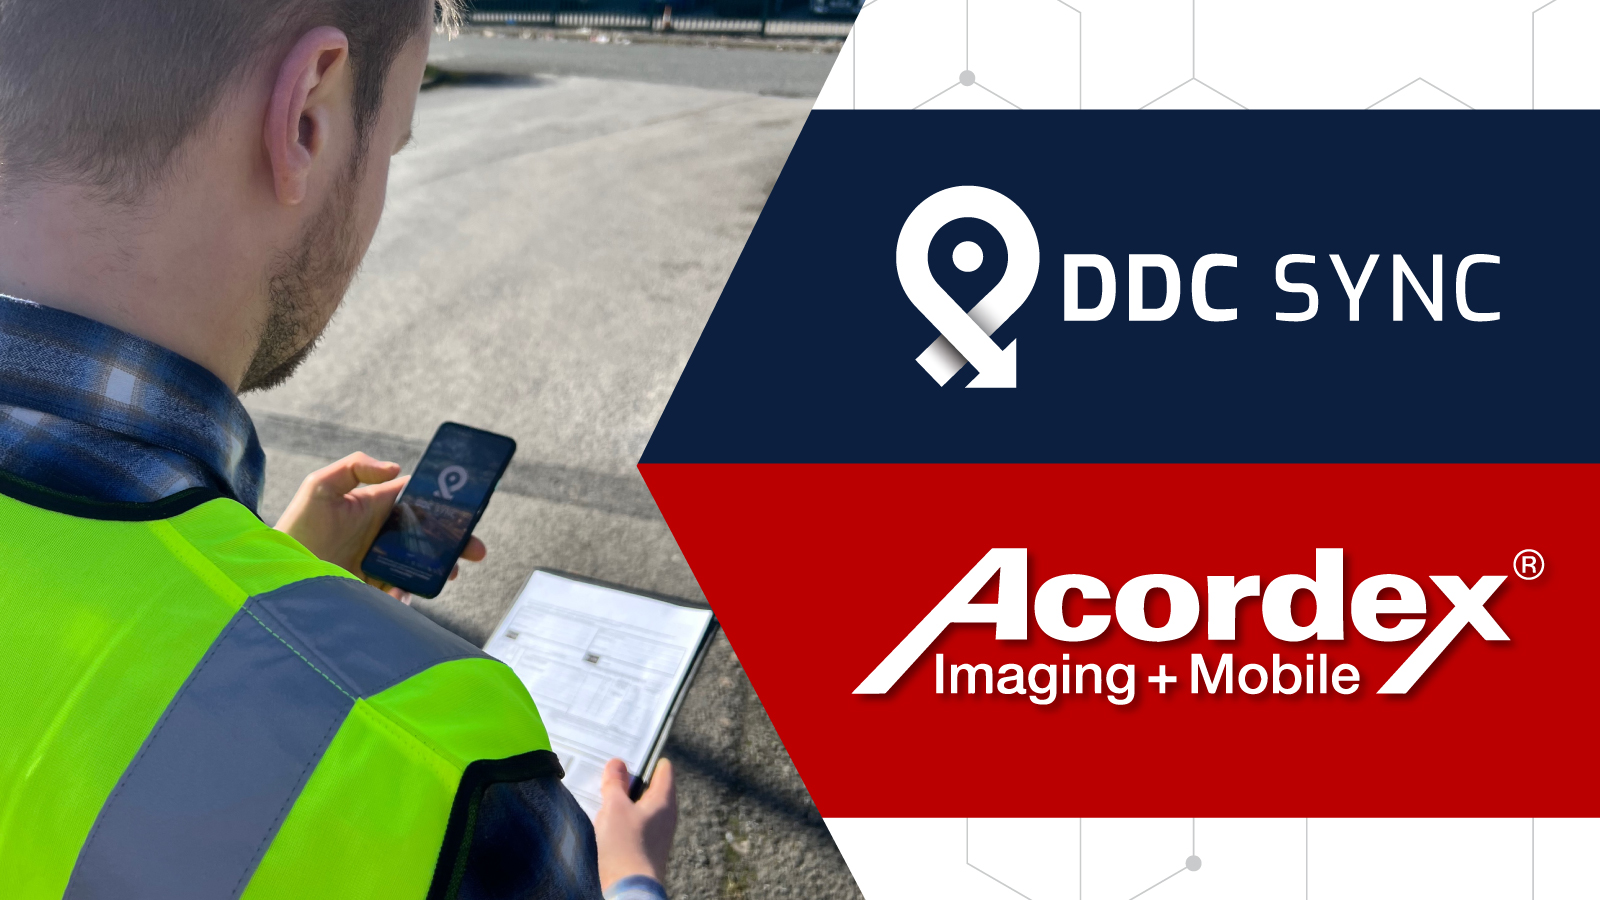 DDC FPO Partners with Acordex to Extend Mobile OCR Benefits from First to Final Mile